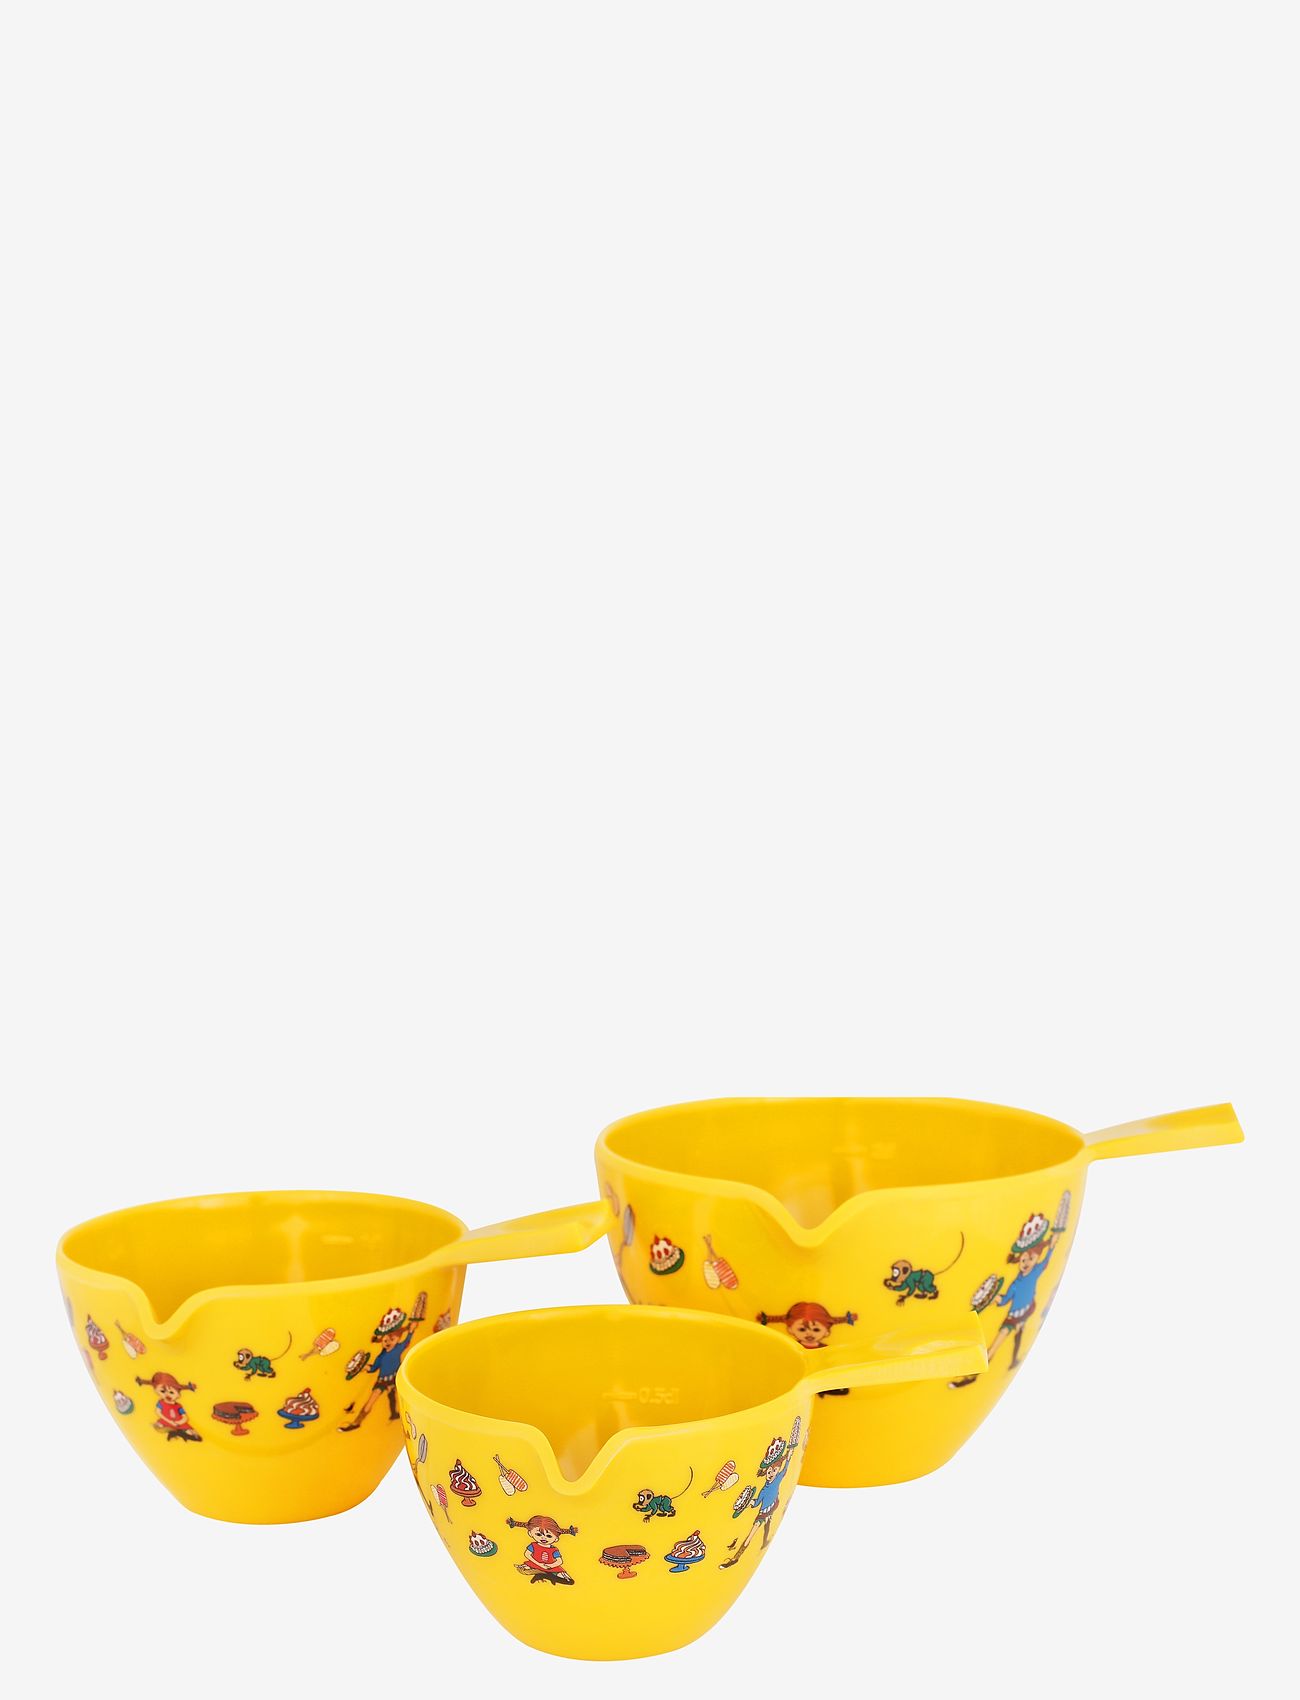 Martinex - PIPPI L BAKES MEASURING CUPS - bagesæt - yellow - 1